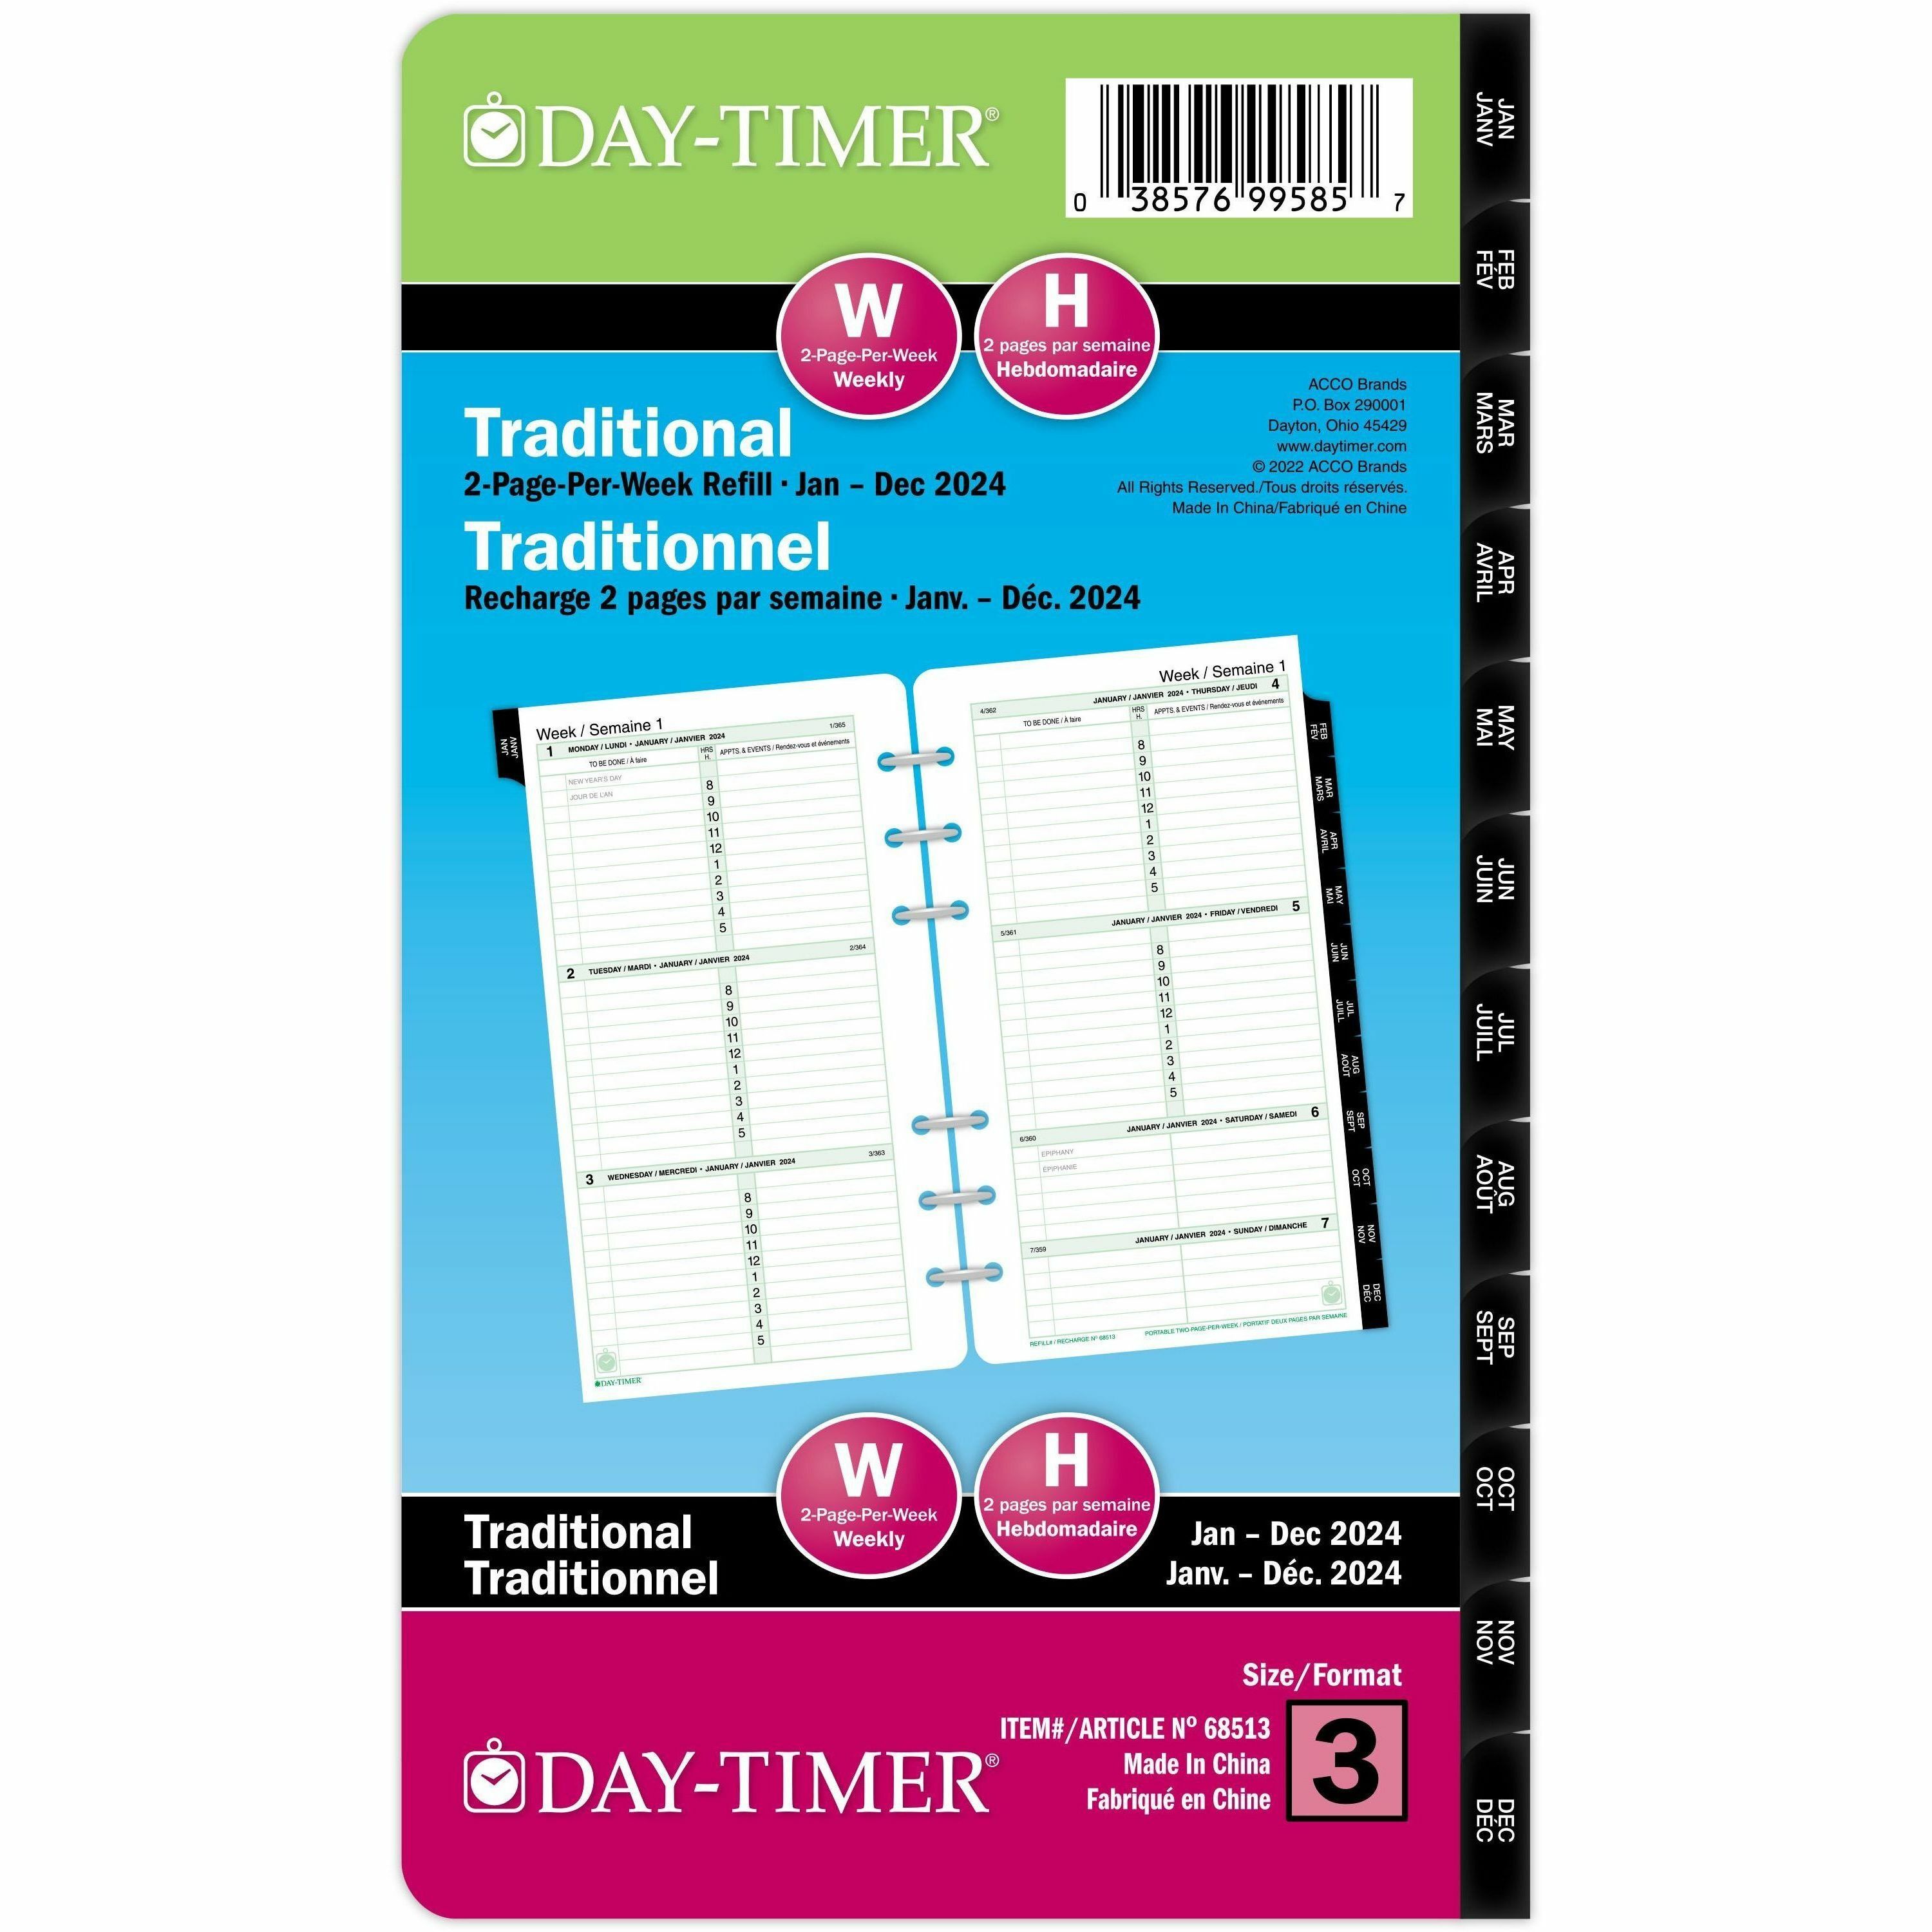 Kamloops Office Systems Office Supplies Calendars & Planners